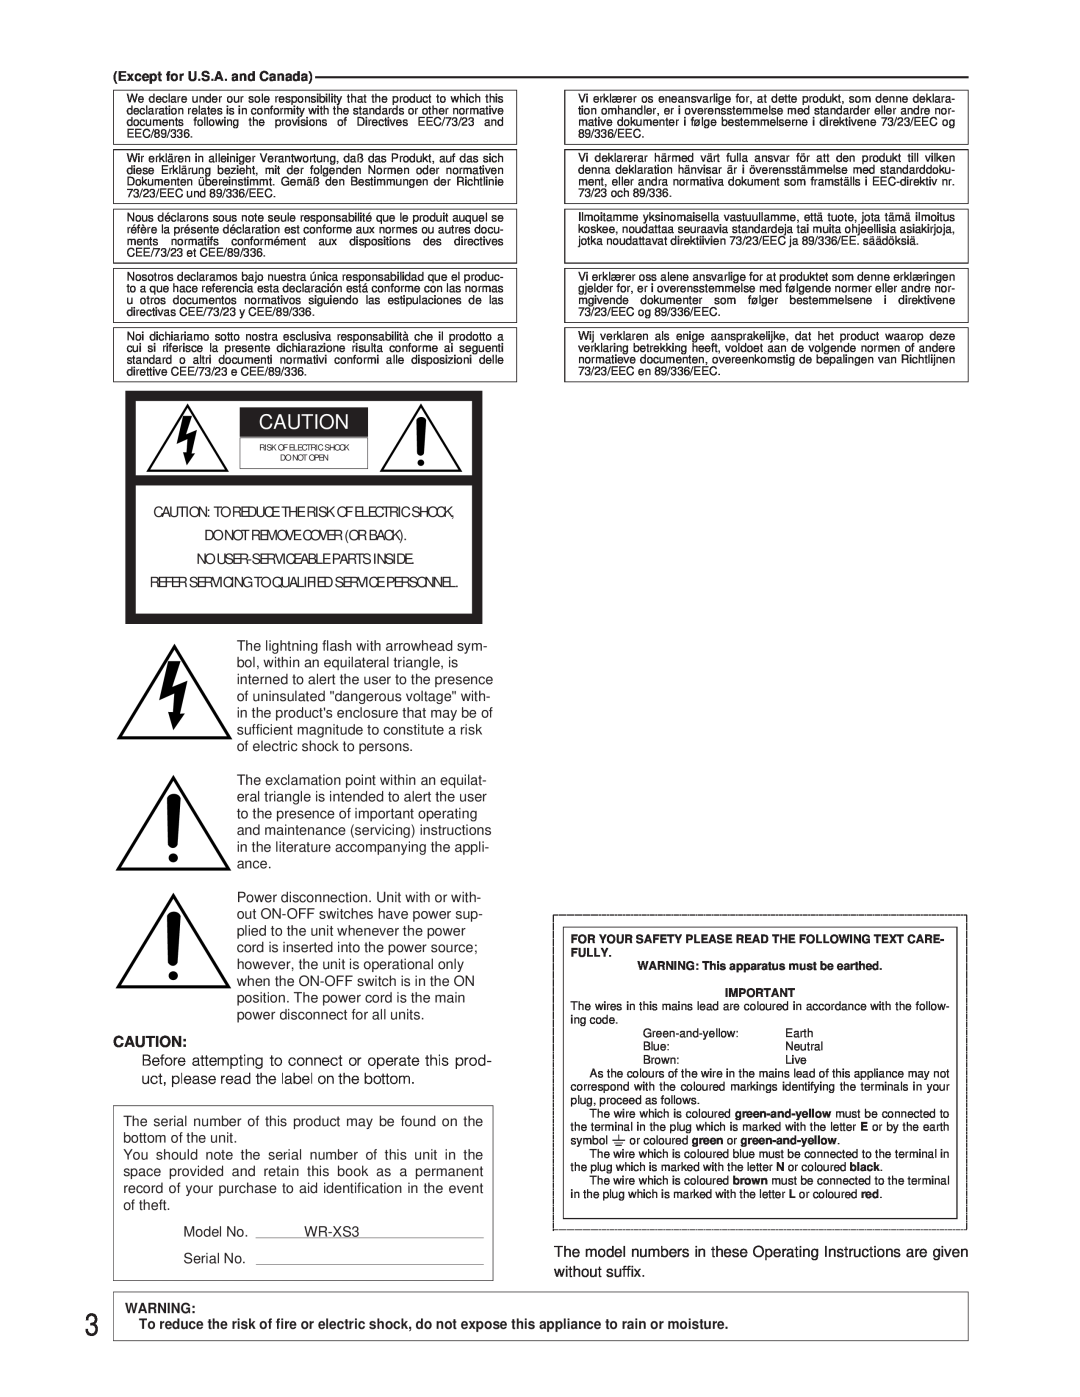 Panasonic WR-XS3P operating instructions Caution To Reduce The Risk Of Electric Shock 